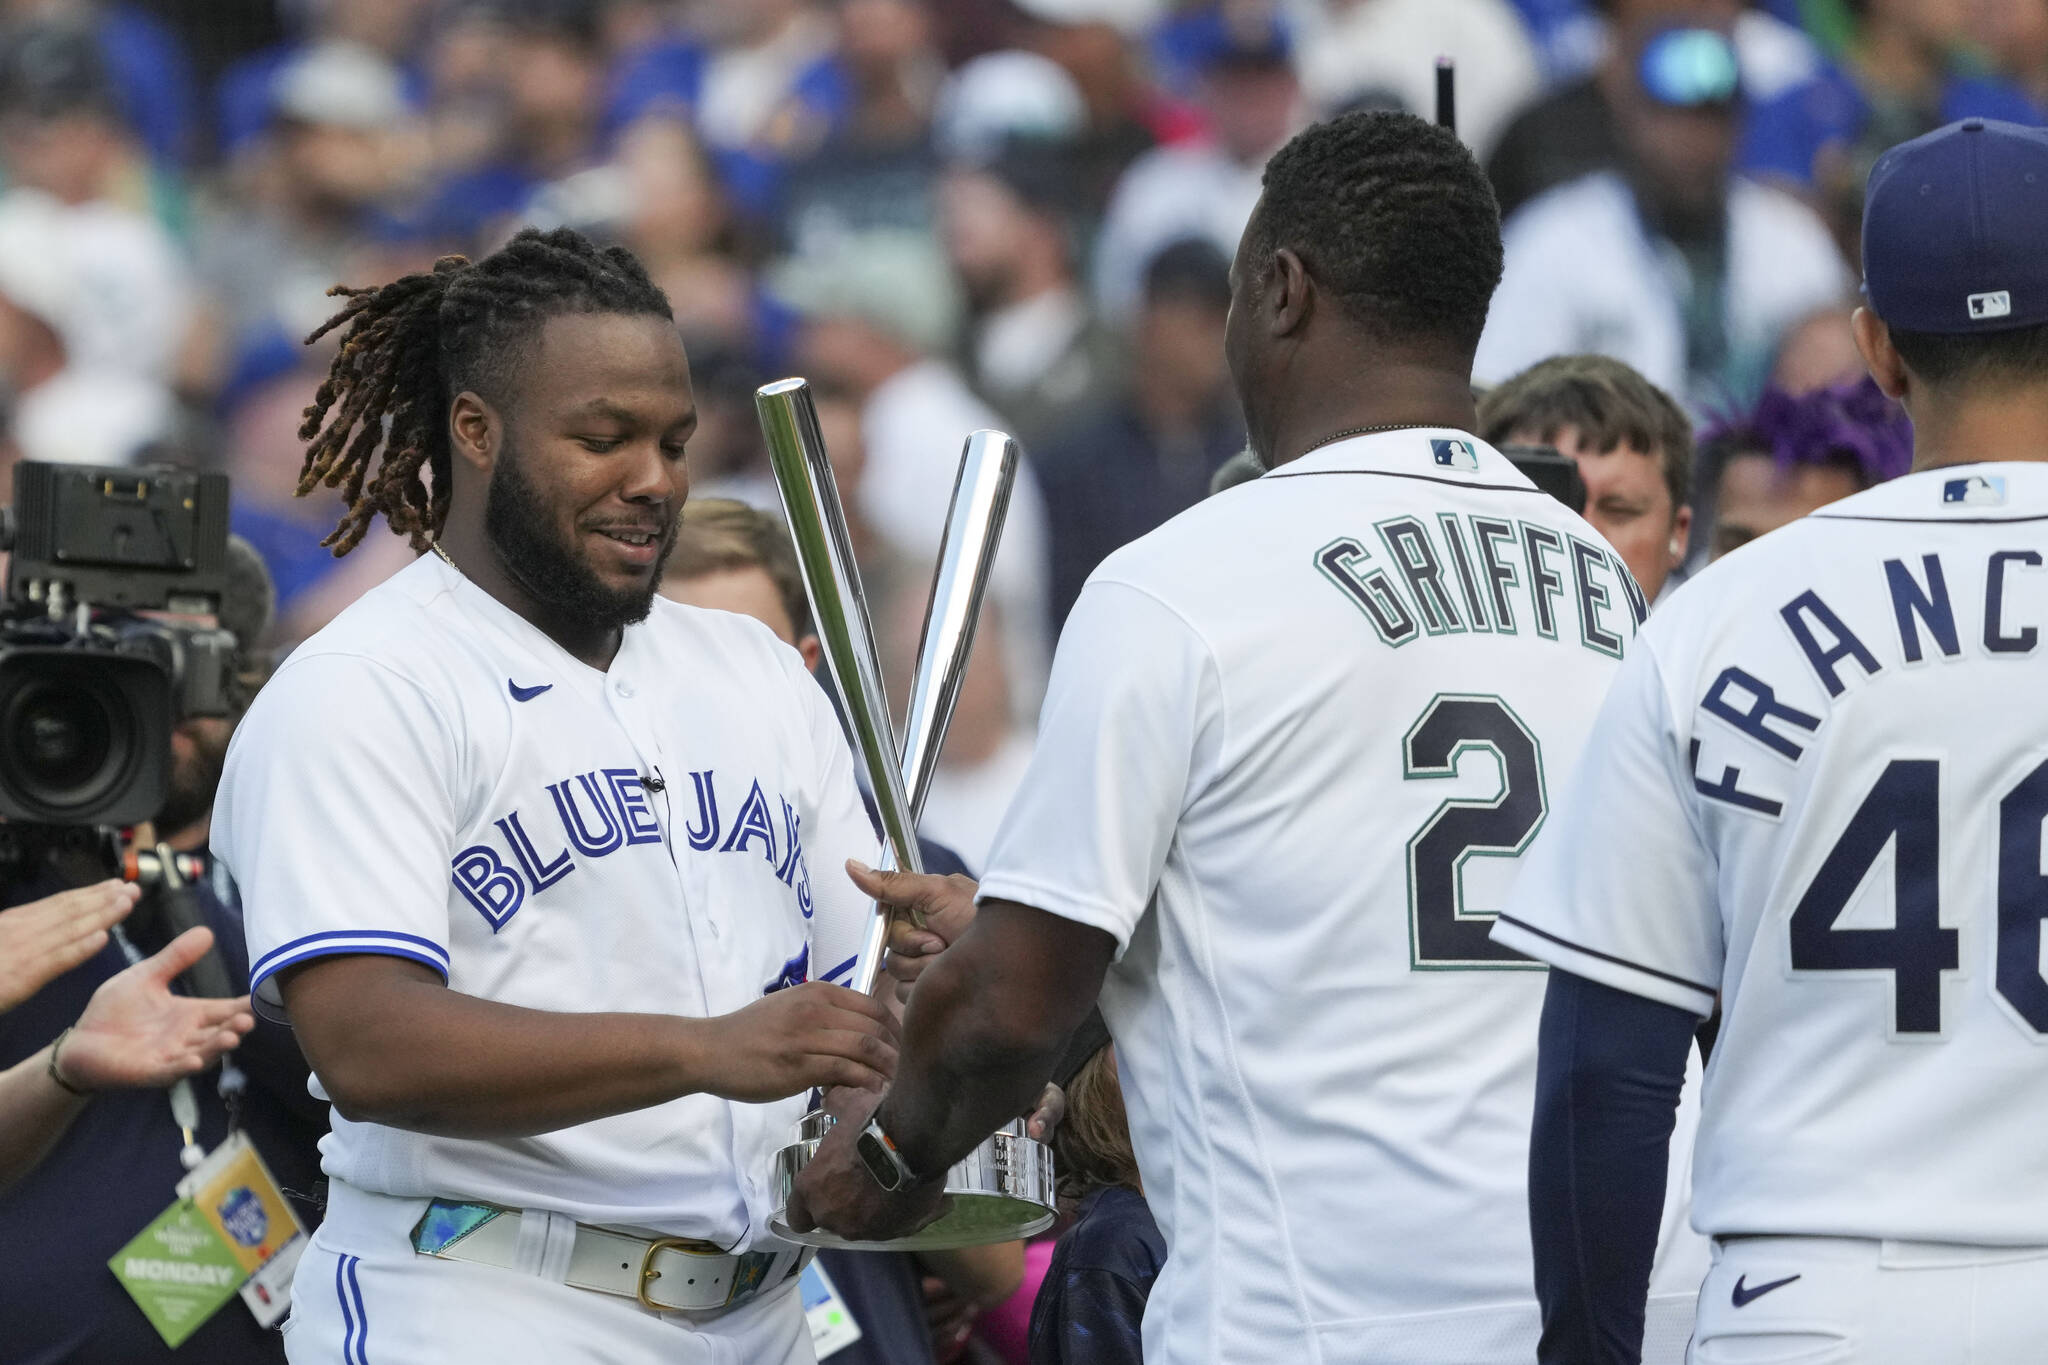 The Blue Jays’ Vladimir Guerrero Jr. accepts his trophy from former Seattle Mariner Ken Griffey Jr. after winning the MLB All-Star Home Run Derby on Monday night in Seattle. (AP Photo/Ted Warren)